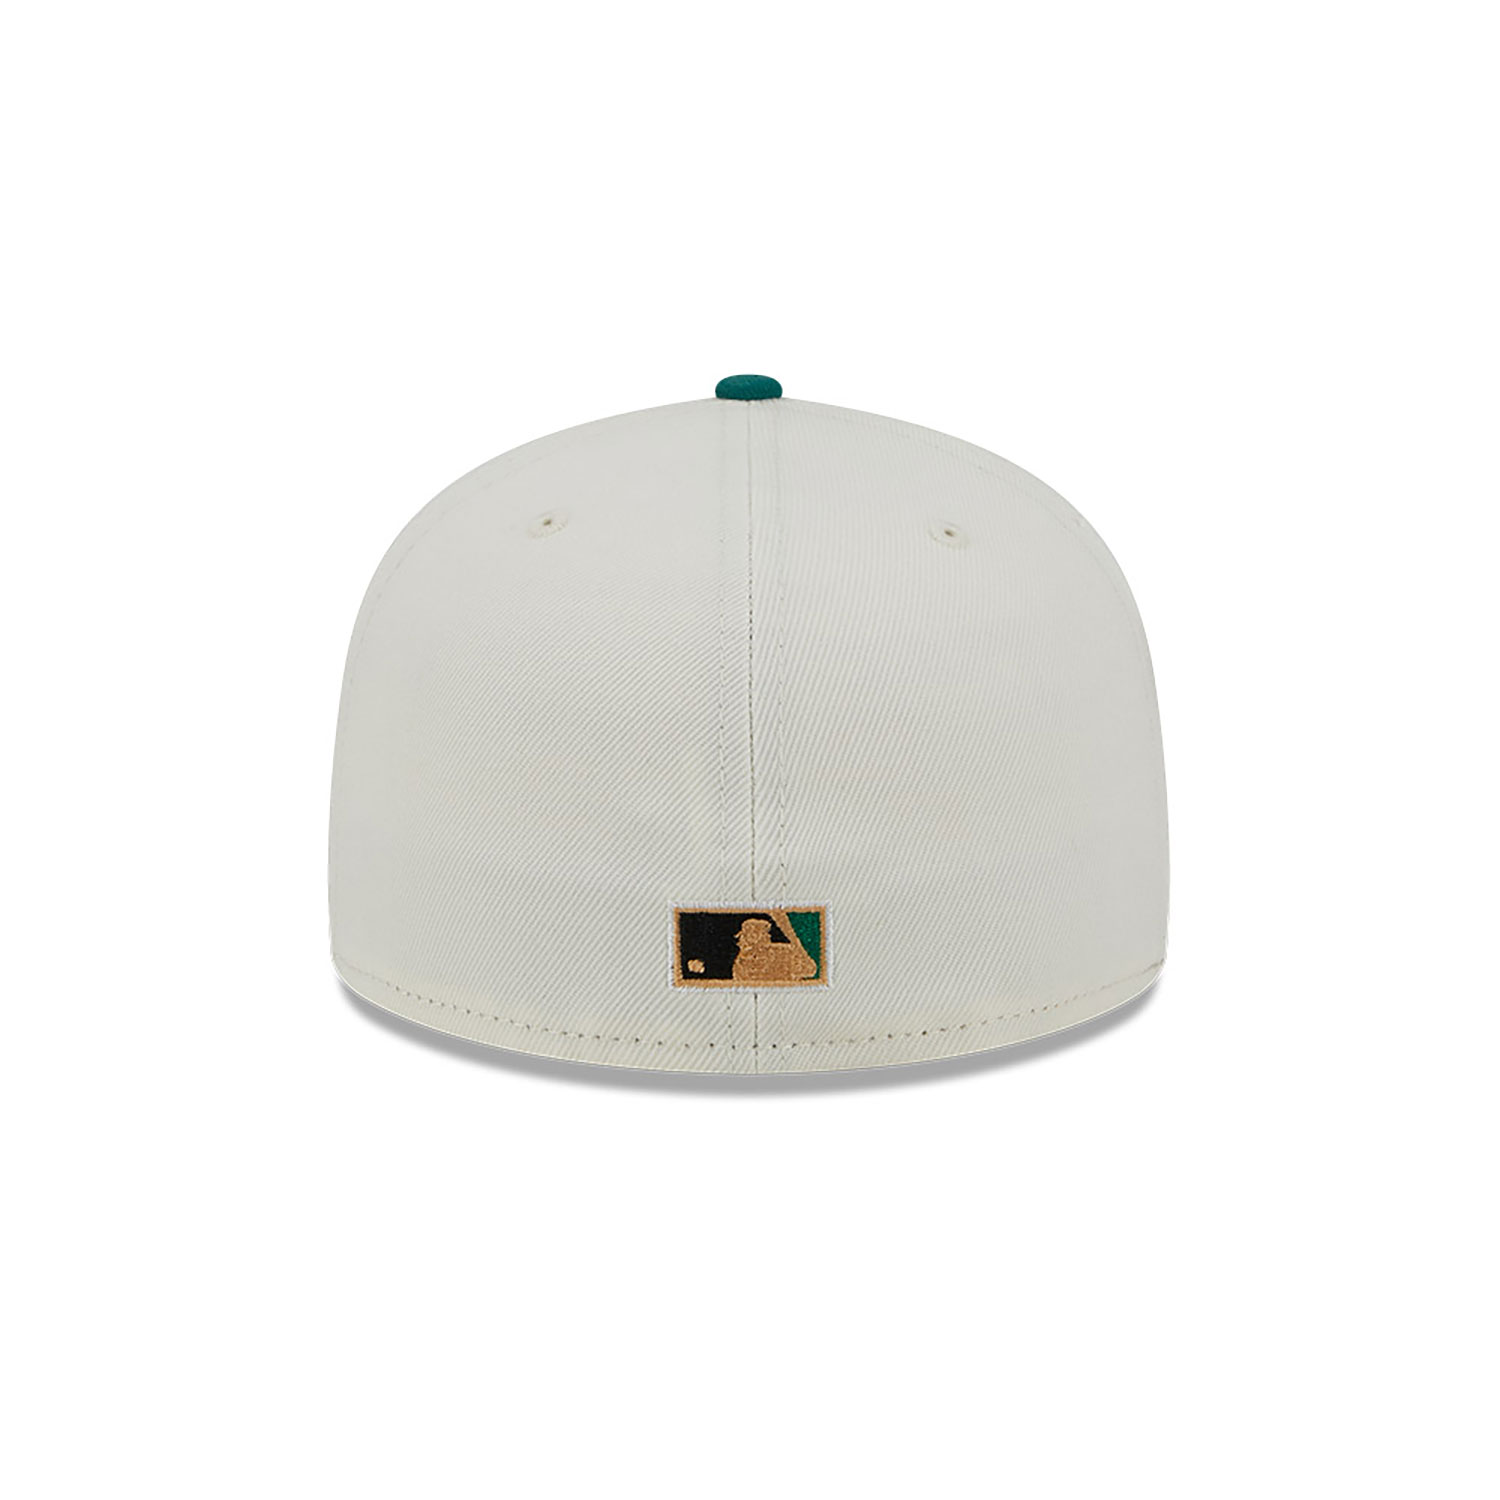 California Angels Camp Off White 59FIFTY Fitted Cap